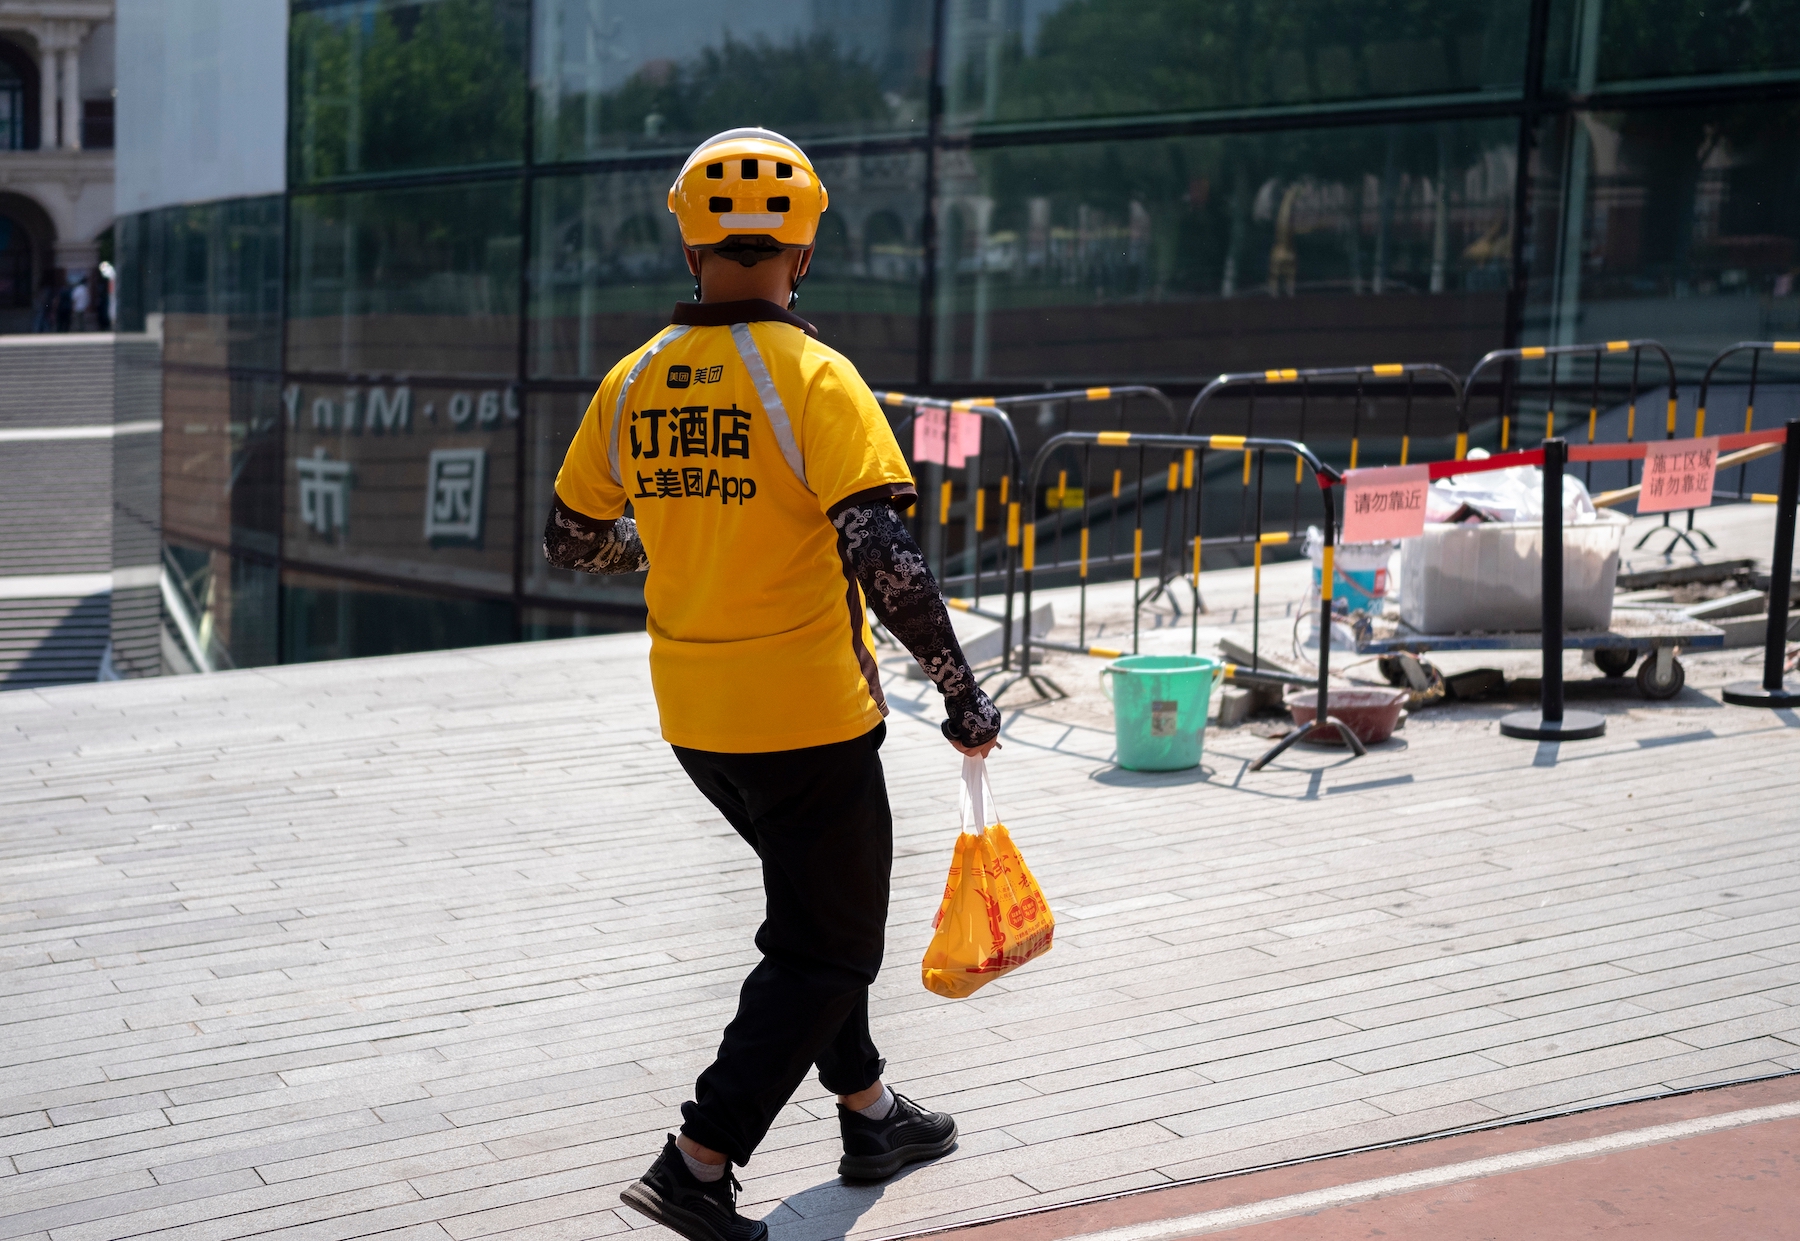 A Meituan food delivery worker delivers a meal on foot